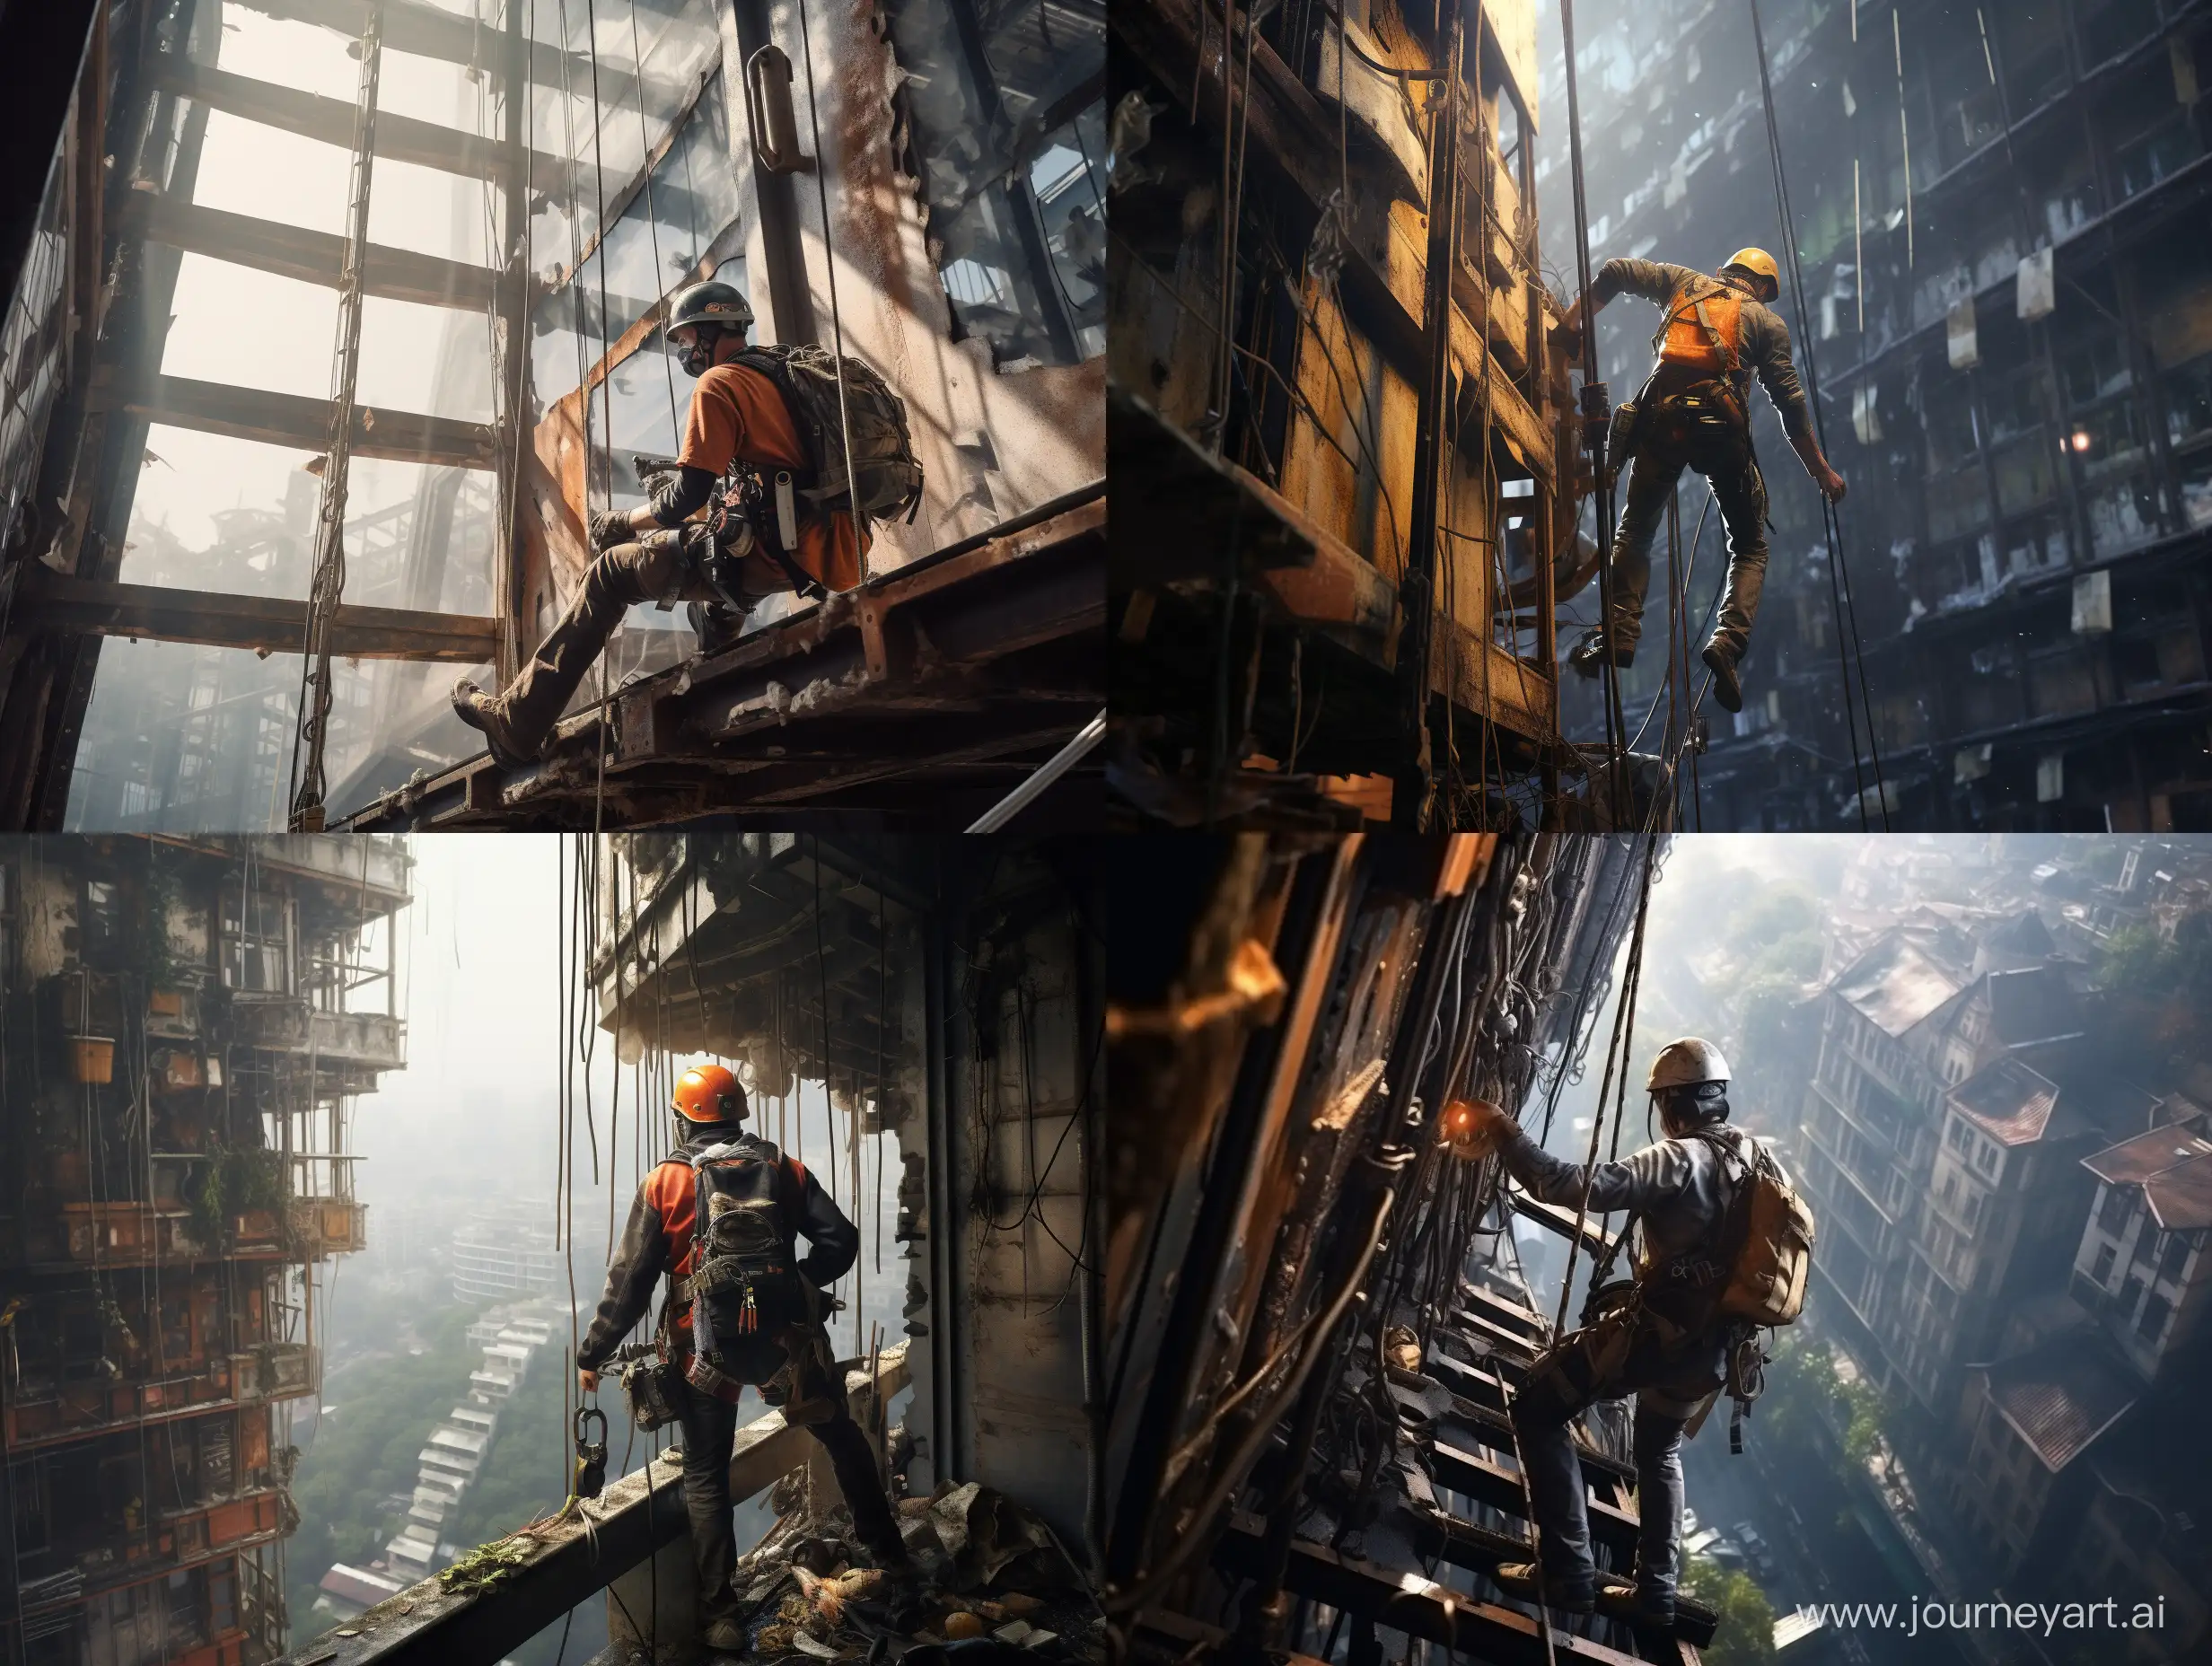 Professional-Industrial-Climbers-Using-Petzl-Equipment-to-Wash-Windows